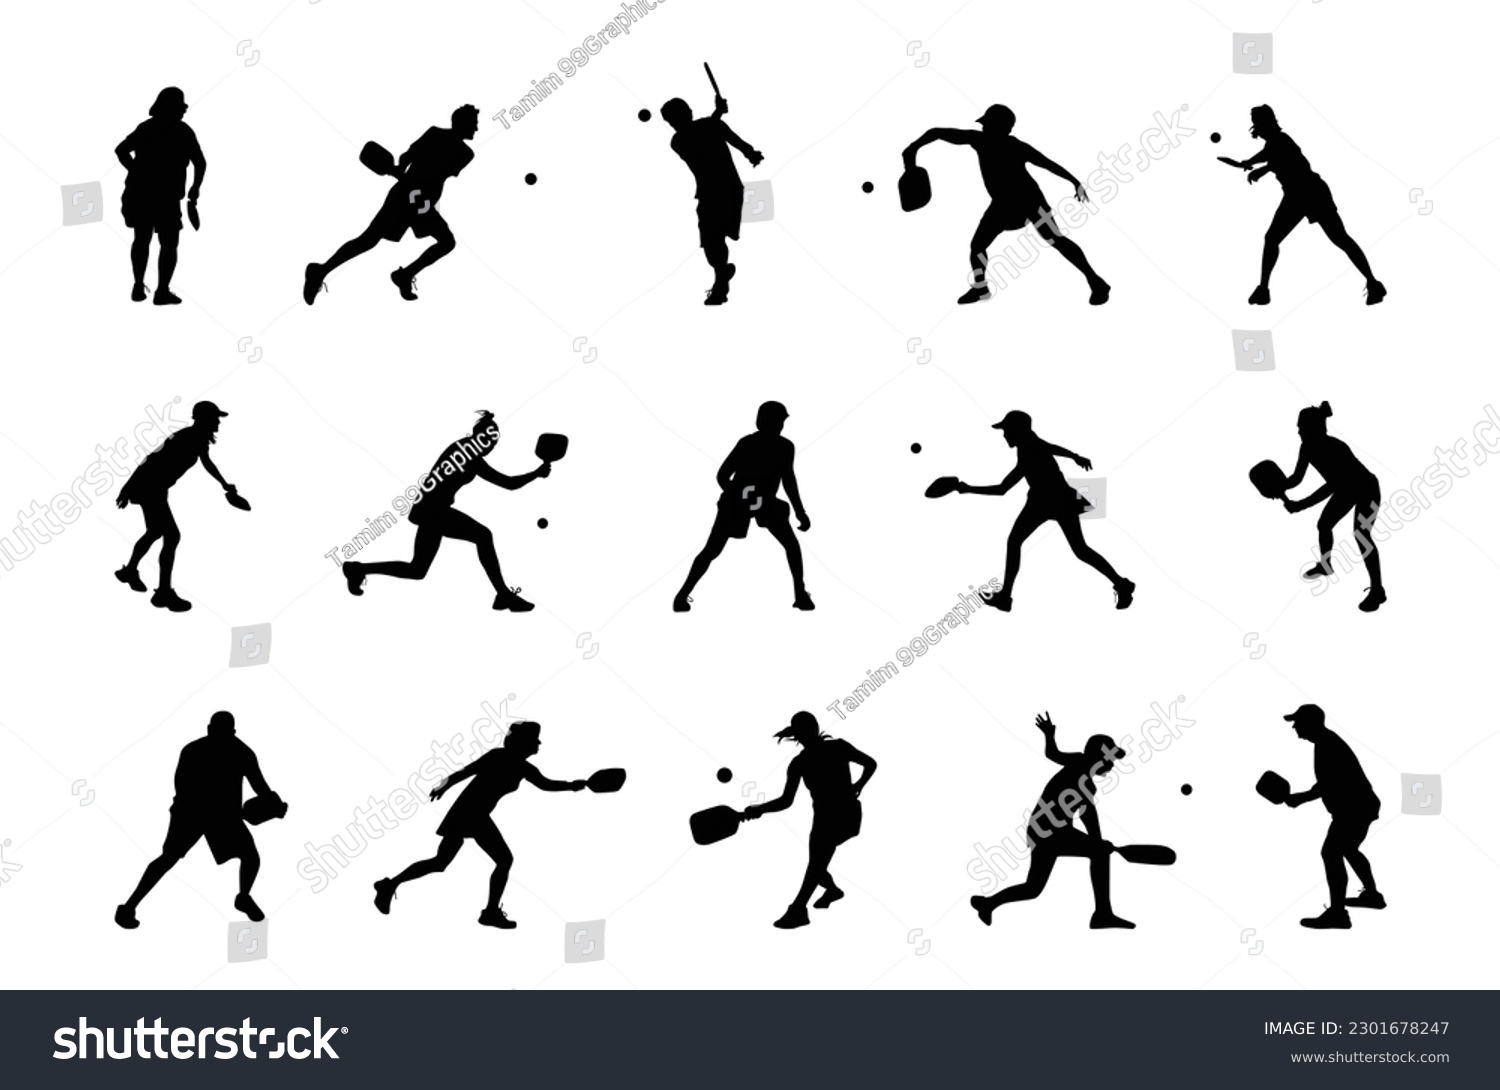 SVG of pickleball player silhouette designs on white background. svg